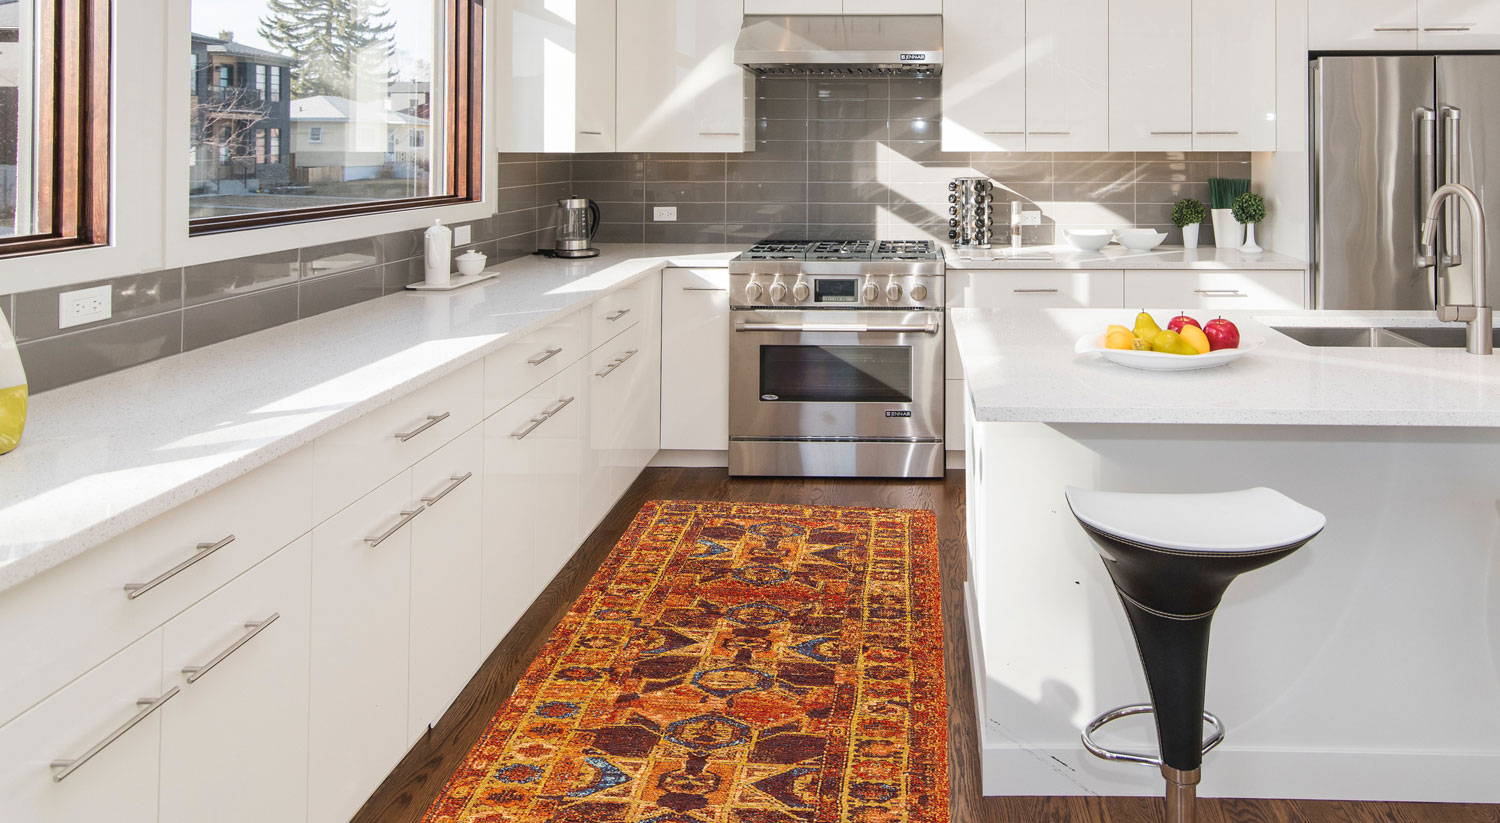 What Types of Rugs are Suitable for Kitchens?